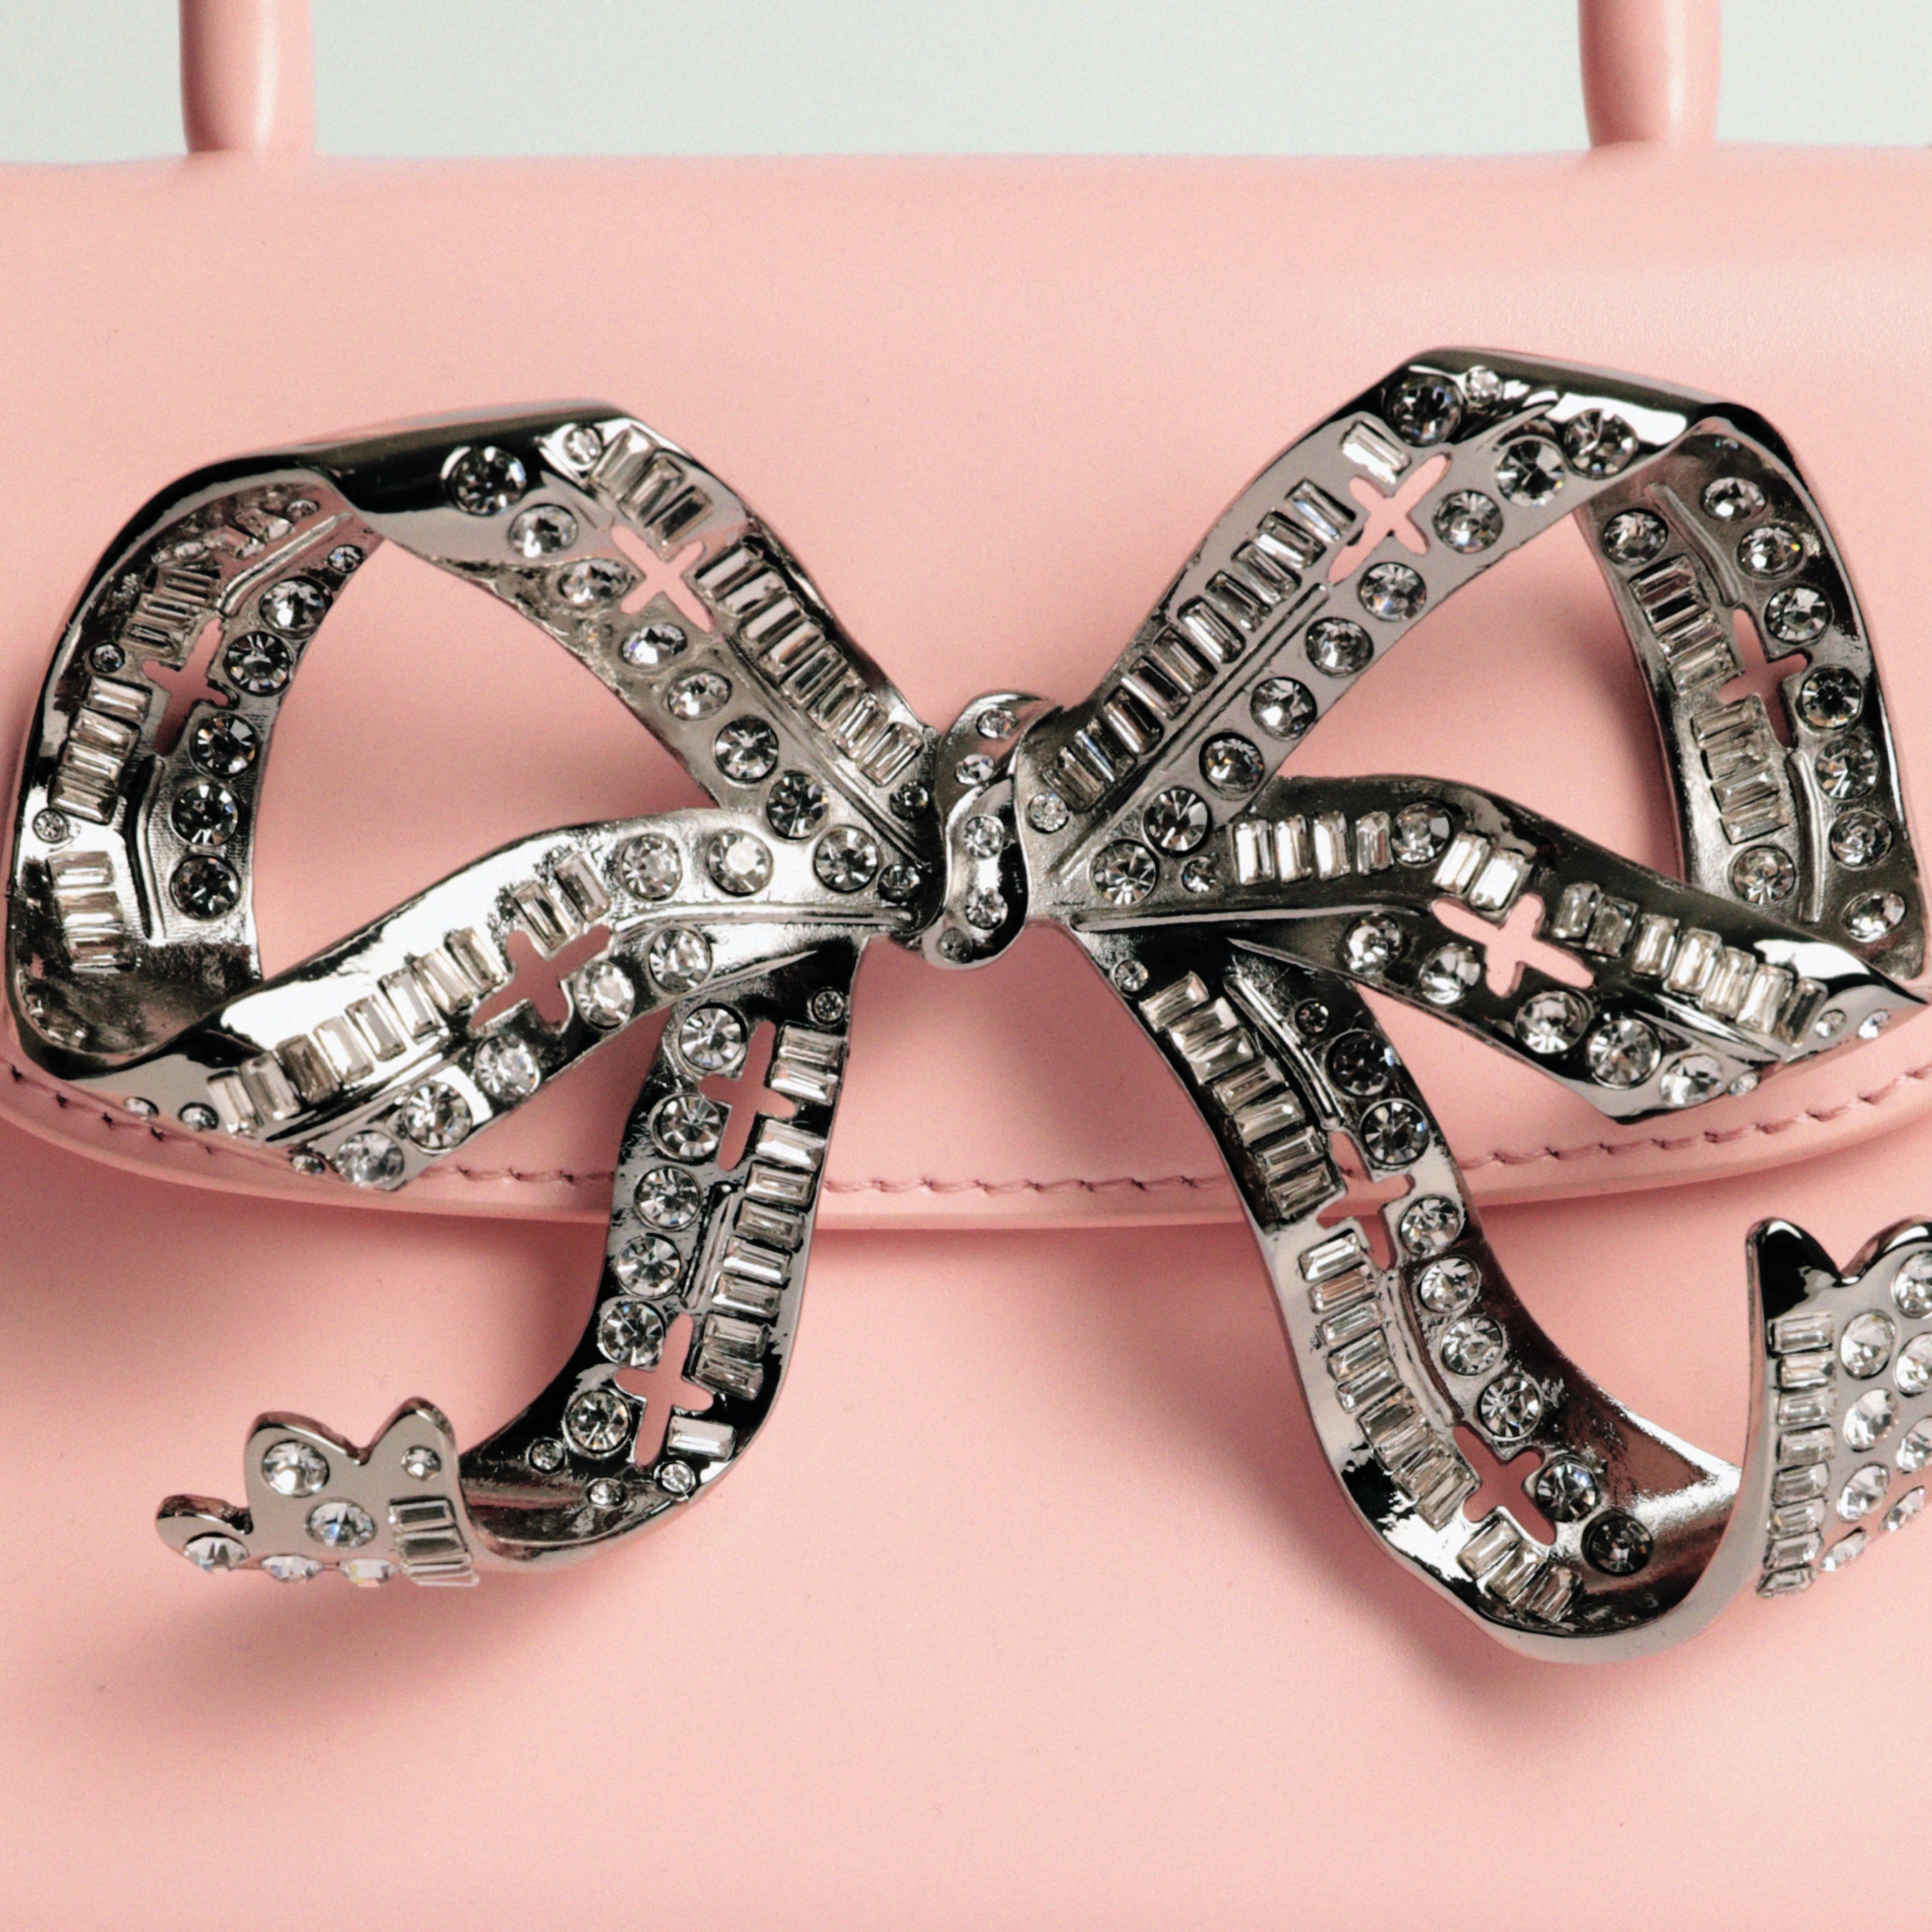 The Bow Mini in Pink with Diamanté